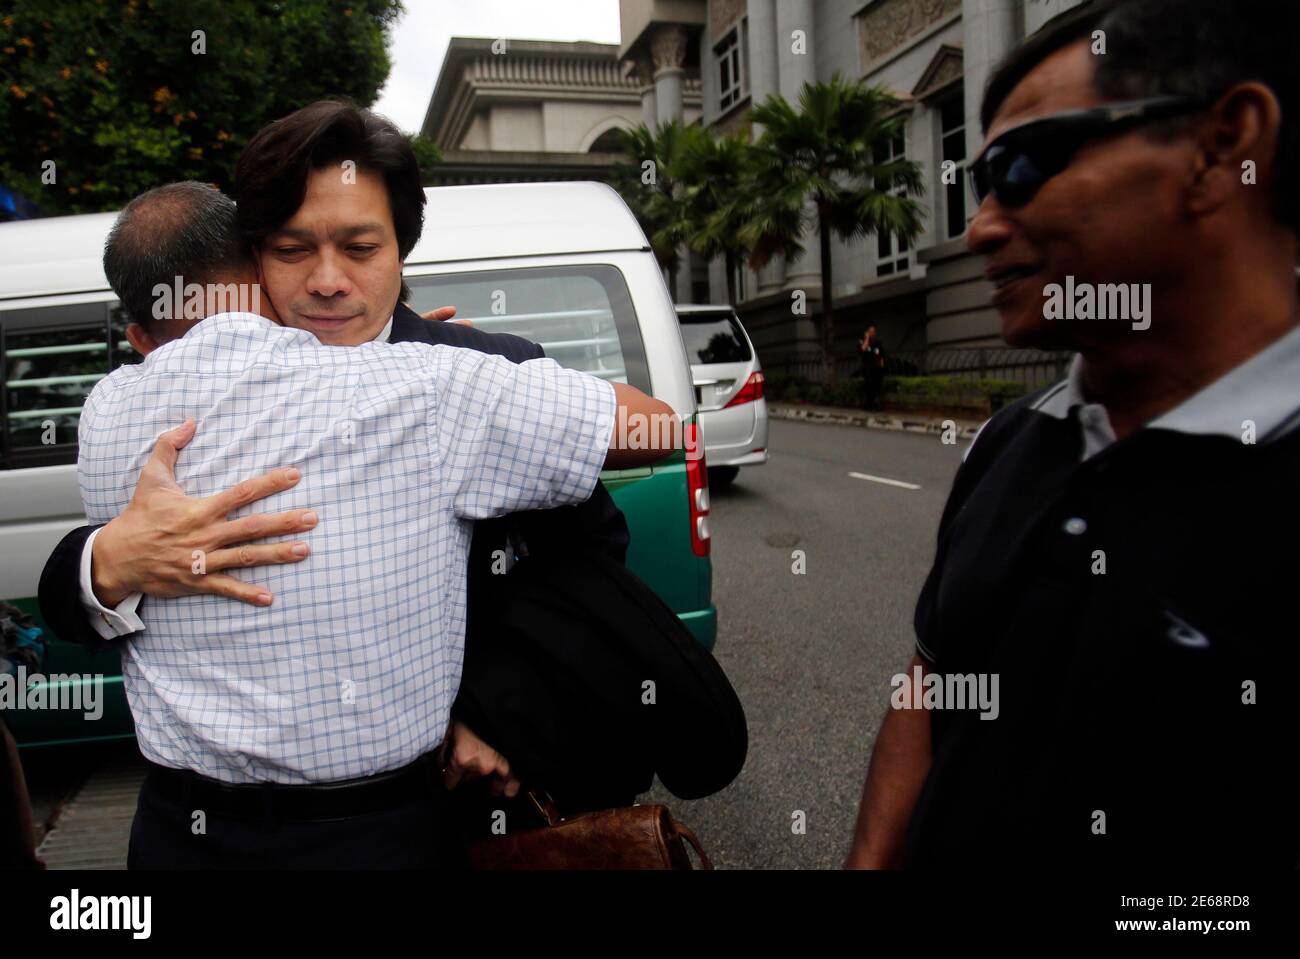 The lawyer of Malaysia's former police special action unit personnel Sirul Azhar Umar and Azilah Hadri, Kamarul Hisham Kamarudin (C), is hugged by Sirul Azhar's uncle, Mustaffa Samad, as Sirul Azhar's brother looks on, outside the courthouse in Putrajaya near Kuala Lumpur August 23, 2013. The Court of Appeal on Friday overturned the conviction of Sirul Azhar and Azilah, who were accused of the murder of Mongolian model Altantuya Shaariibuu, according to local media. In 2009, the two officers were convicted and sentenced to death by the High Court for killing the Mongolian woman in 2006. REUTER Stock Photo